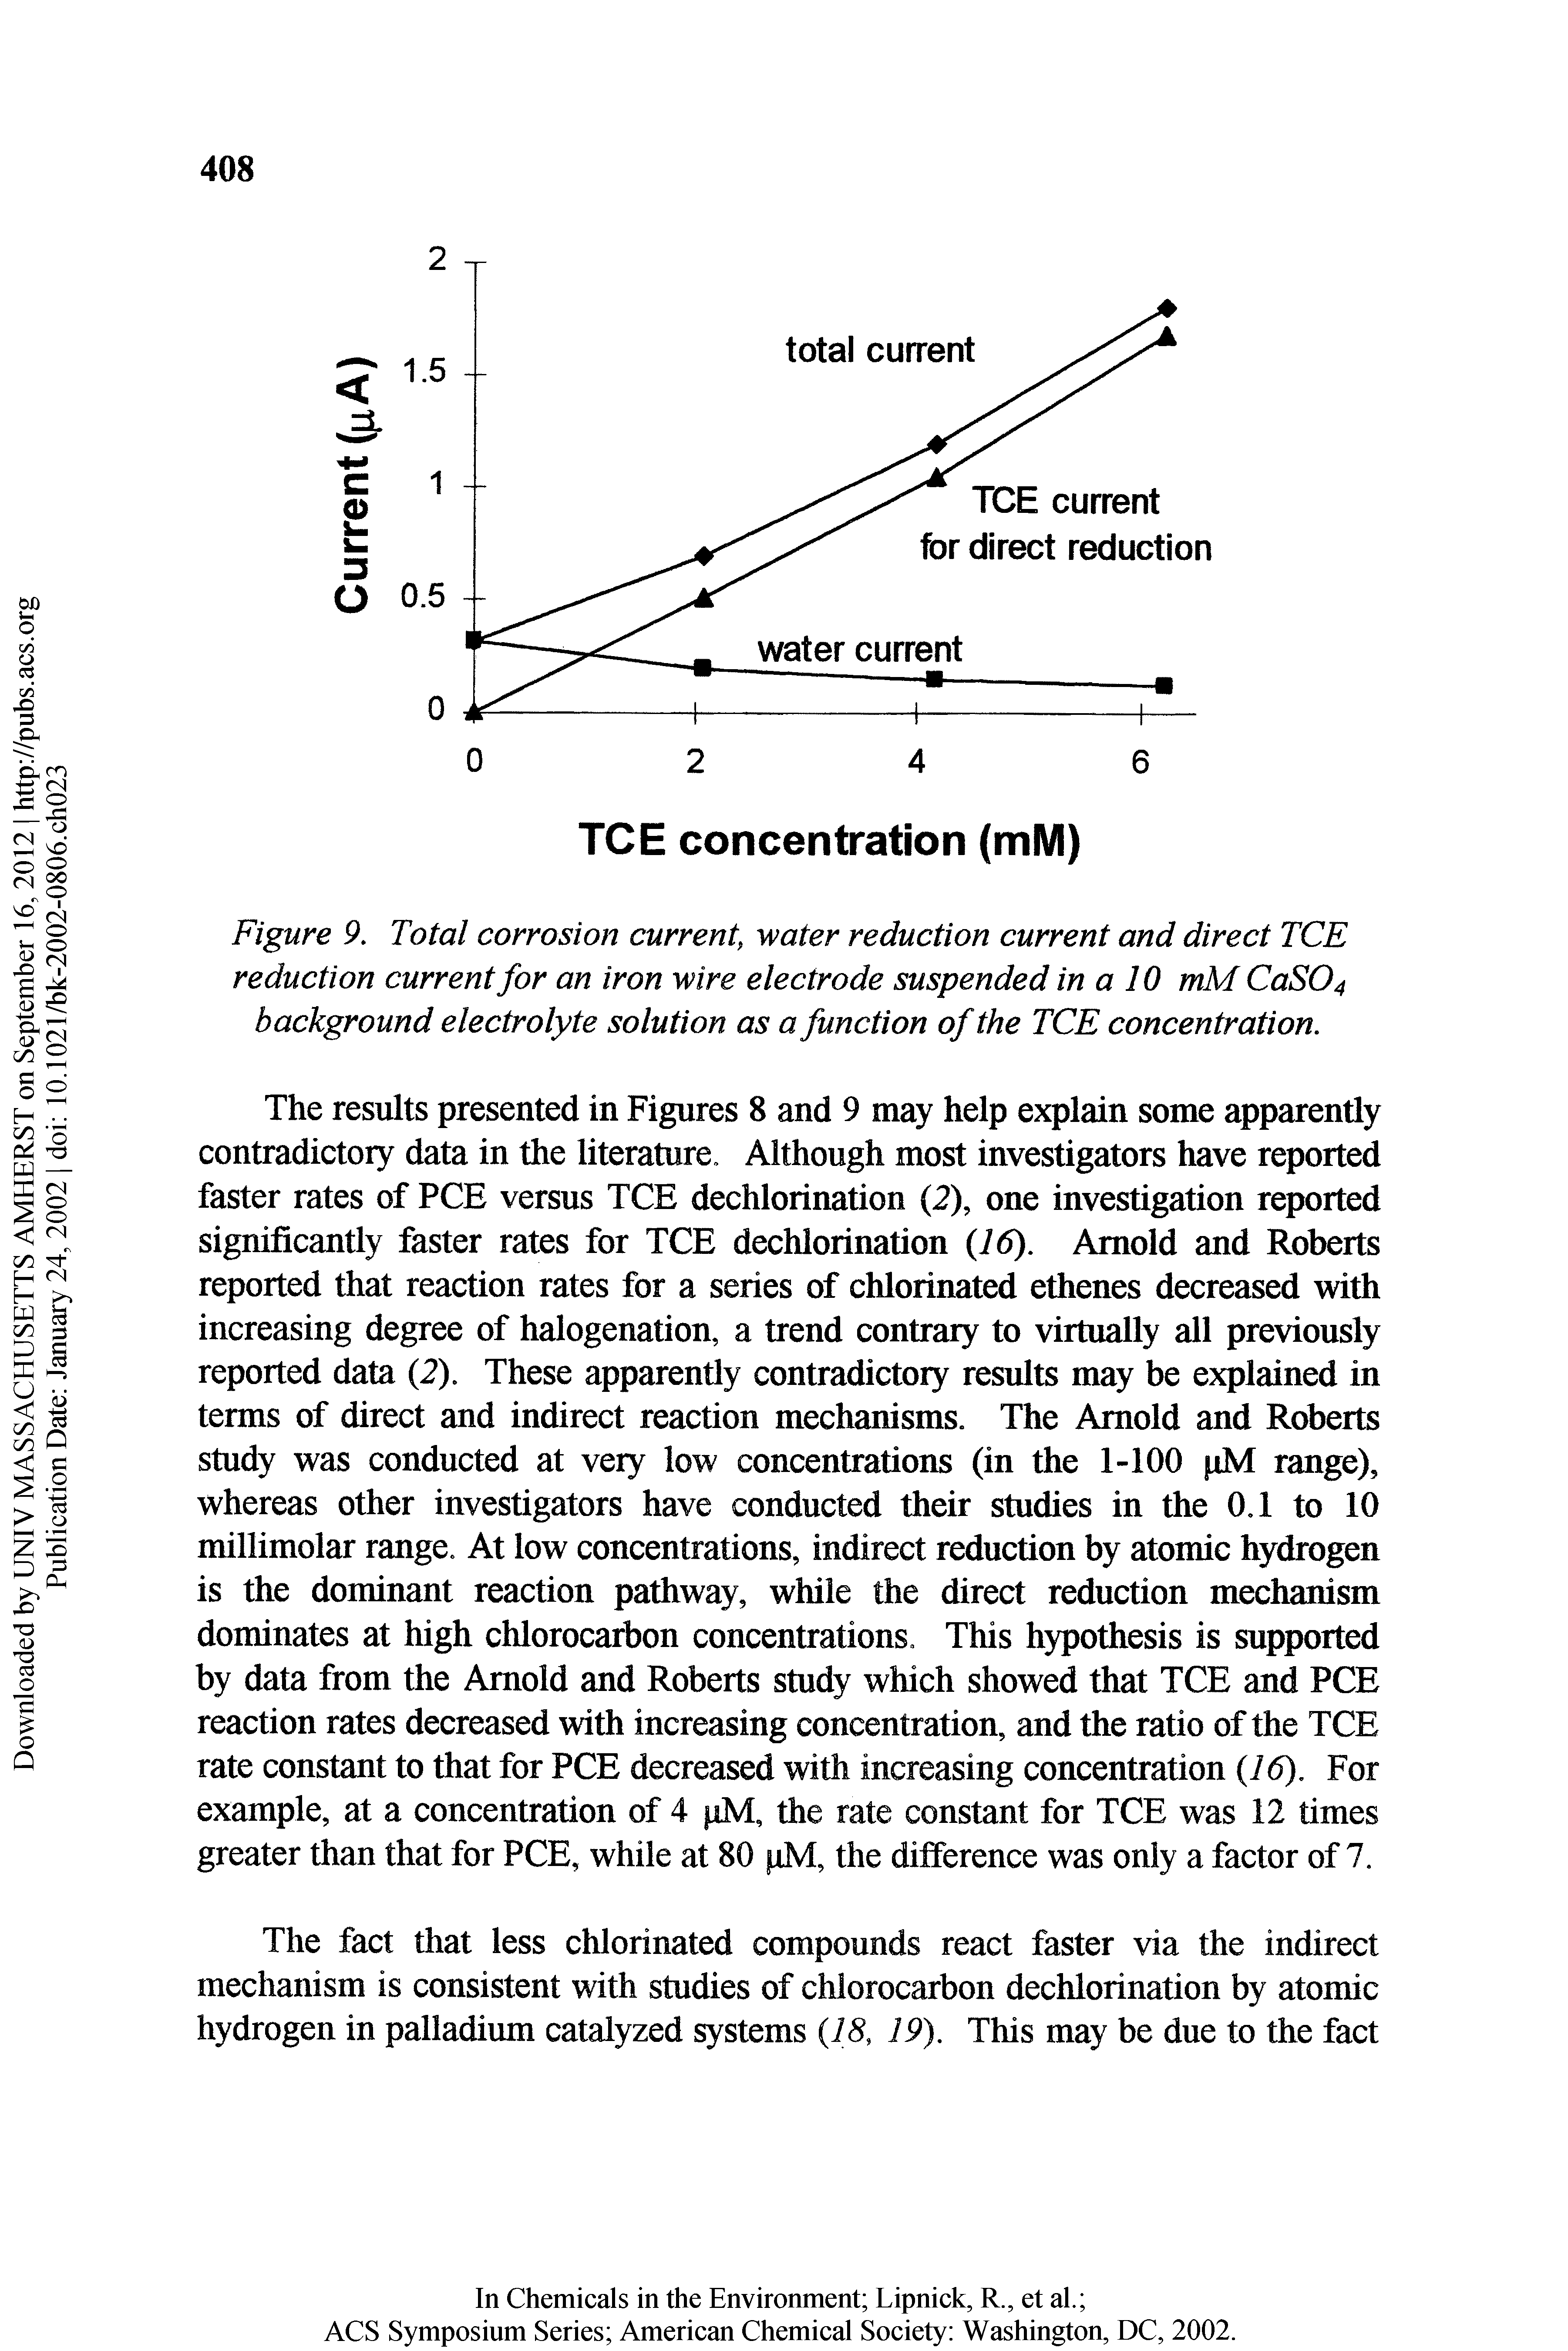 Figure 9. Total corrosion current, water reduction current and direct TCE reduction current for an iron wire electrode suspended in a 10 mM CaS04 background electrolyte solution as a function of the TCE concentration.